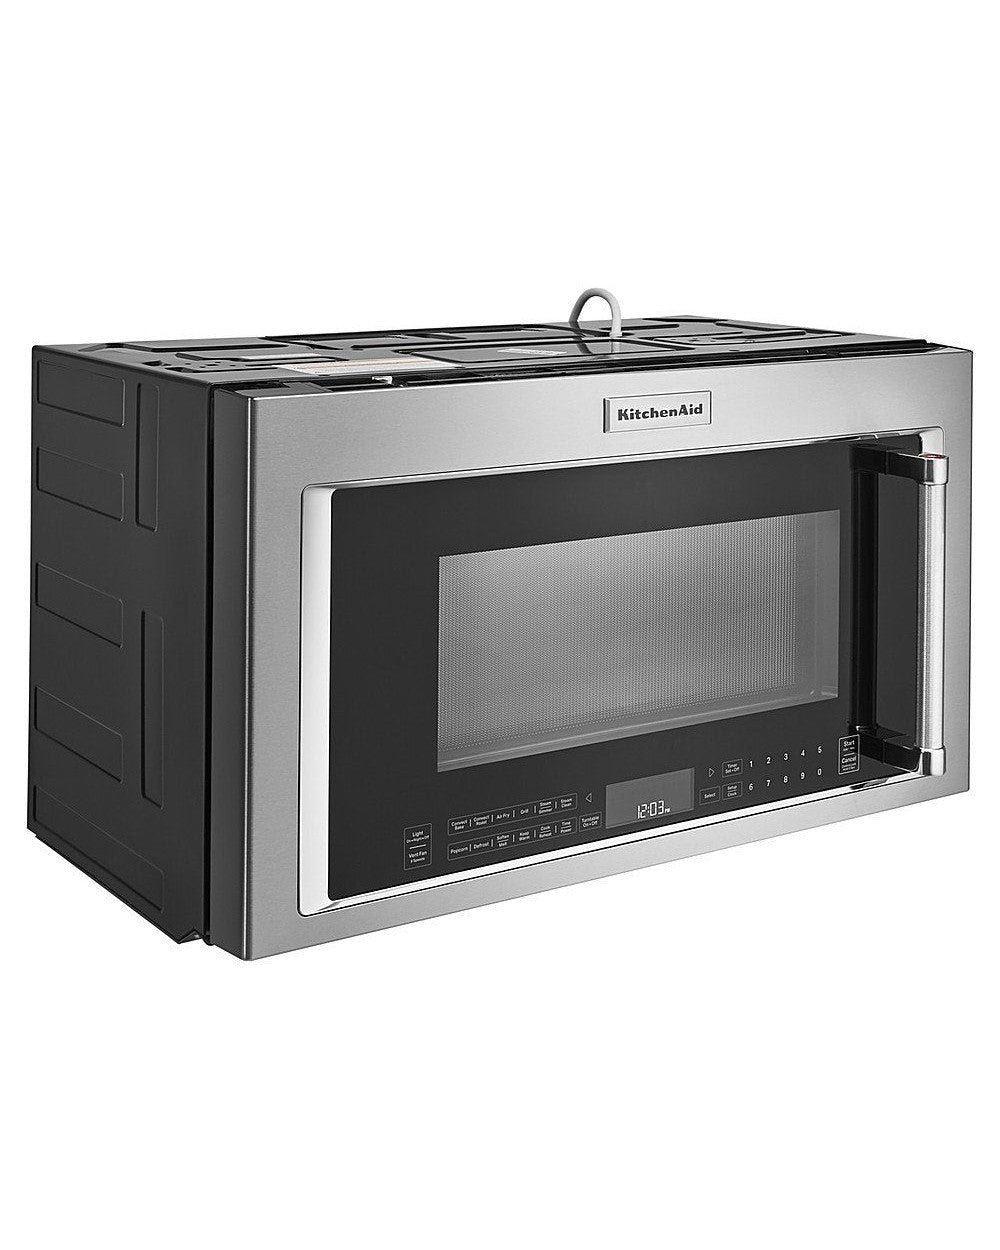 KITCHENAID KMHC319LSS Over-the-Range Convection Microwave with Air Fry Mode